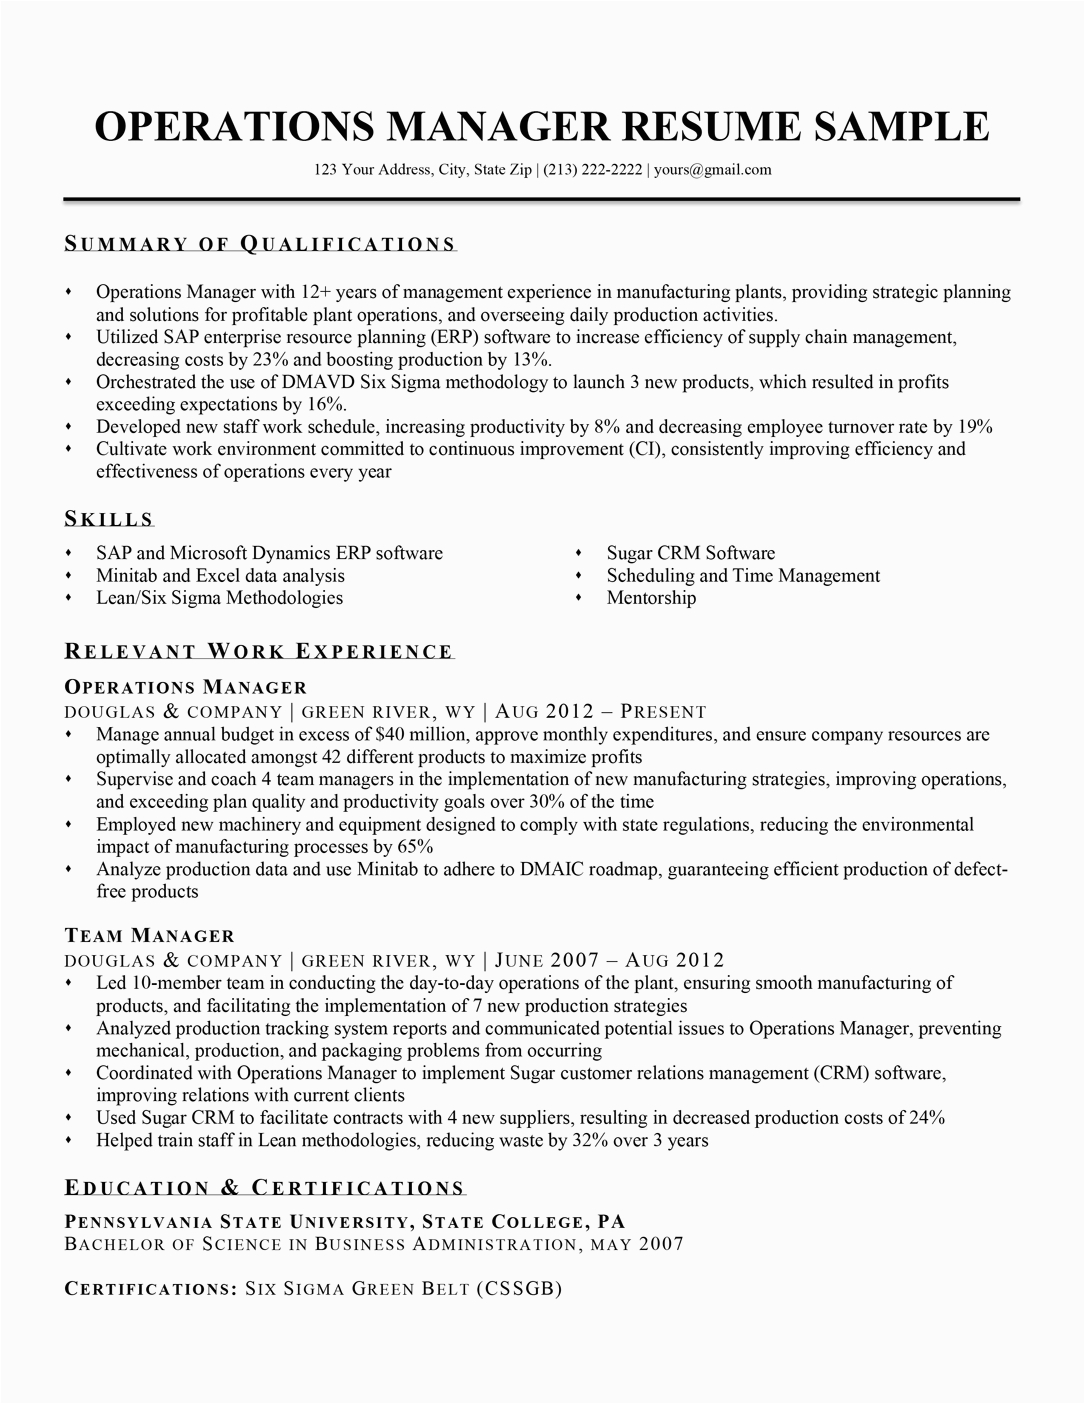 Sample Resume Operations Manager In Manufacturing Operations Manager Resume Sample & Writing Tips